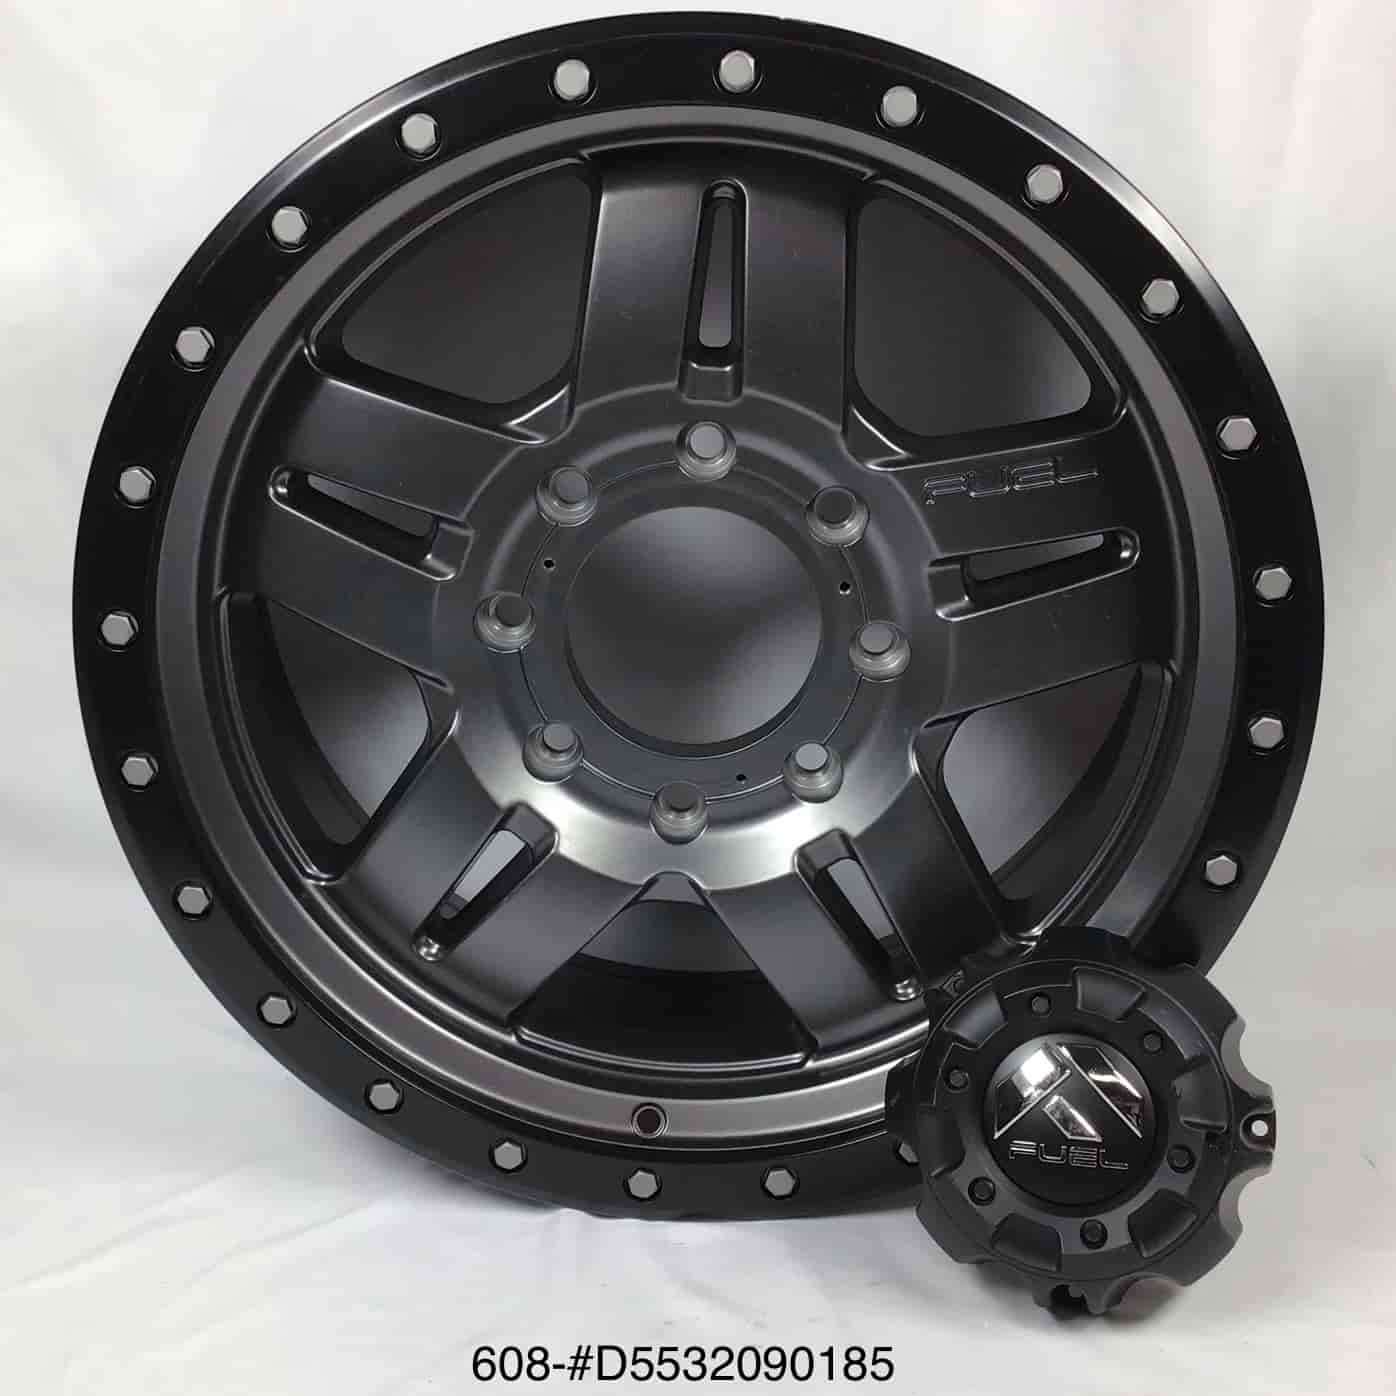 *BLEMISHED* D553 Truck Wheel Size: 20" x 9" Bolt Circle: 8 on 180mm